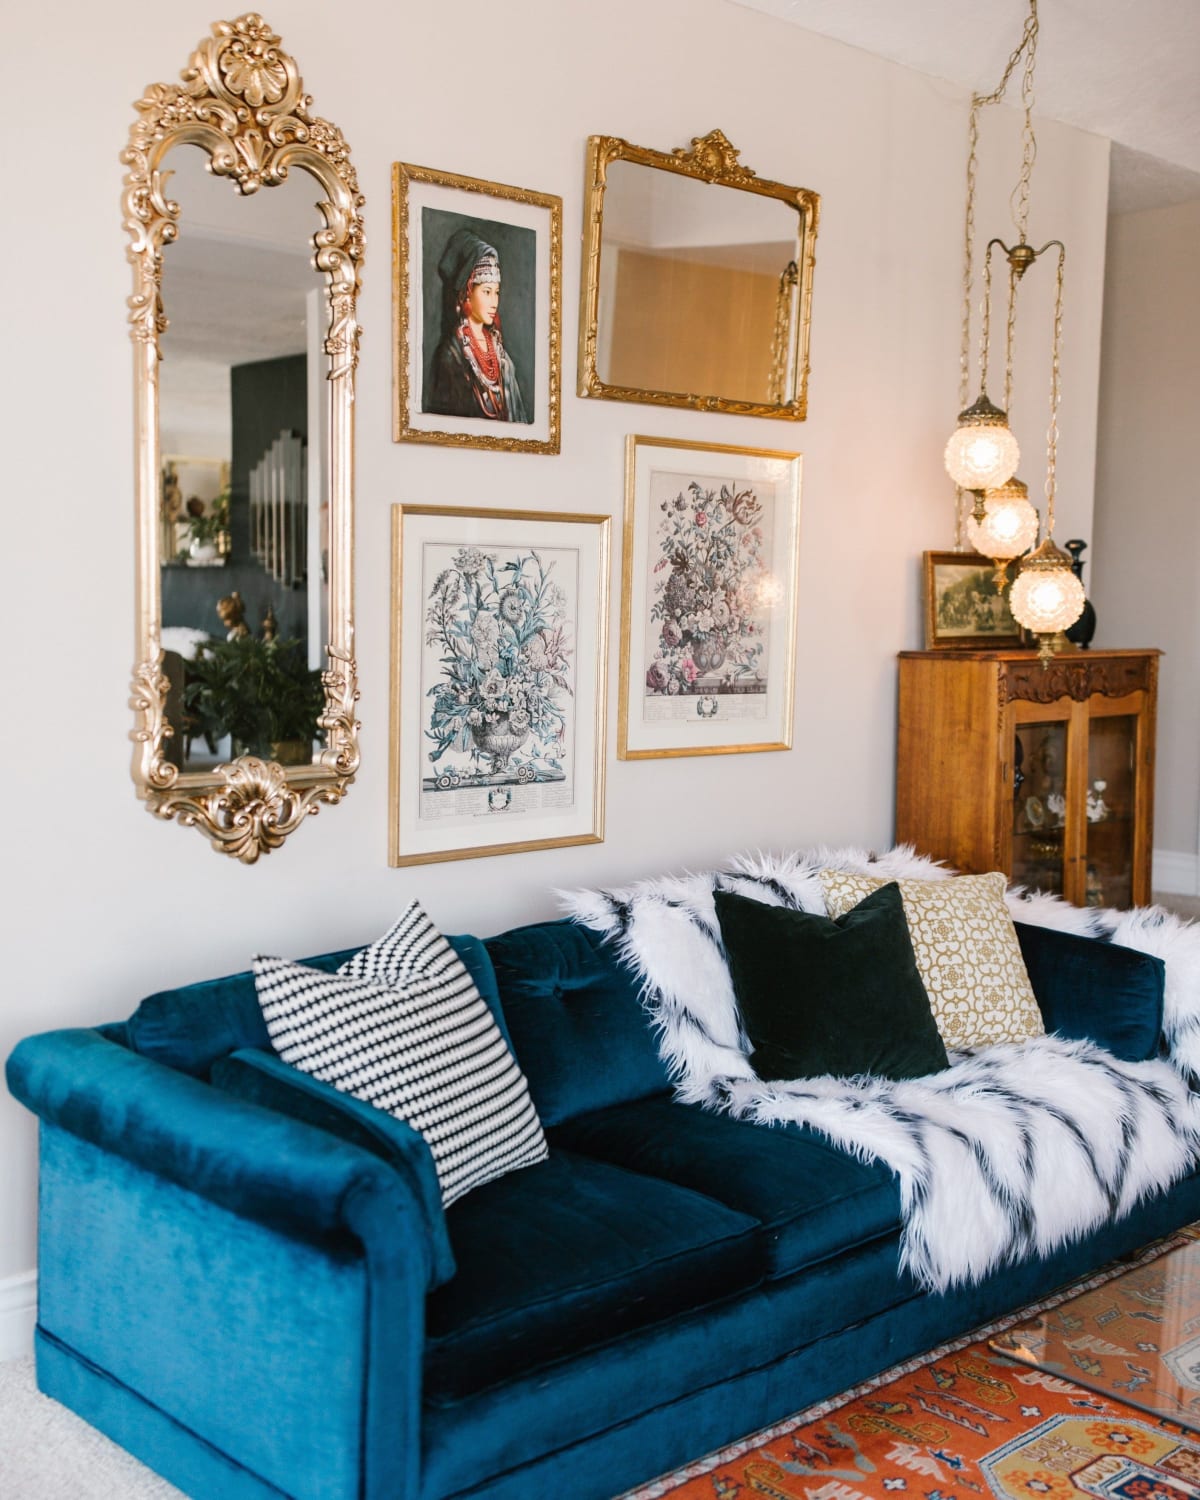 An Eclectic '70s Home Filled With Vintage Finds - Jenasie Earl - The Interior Editor